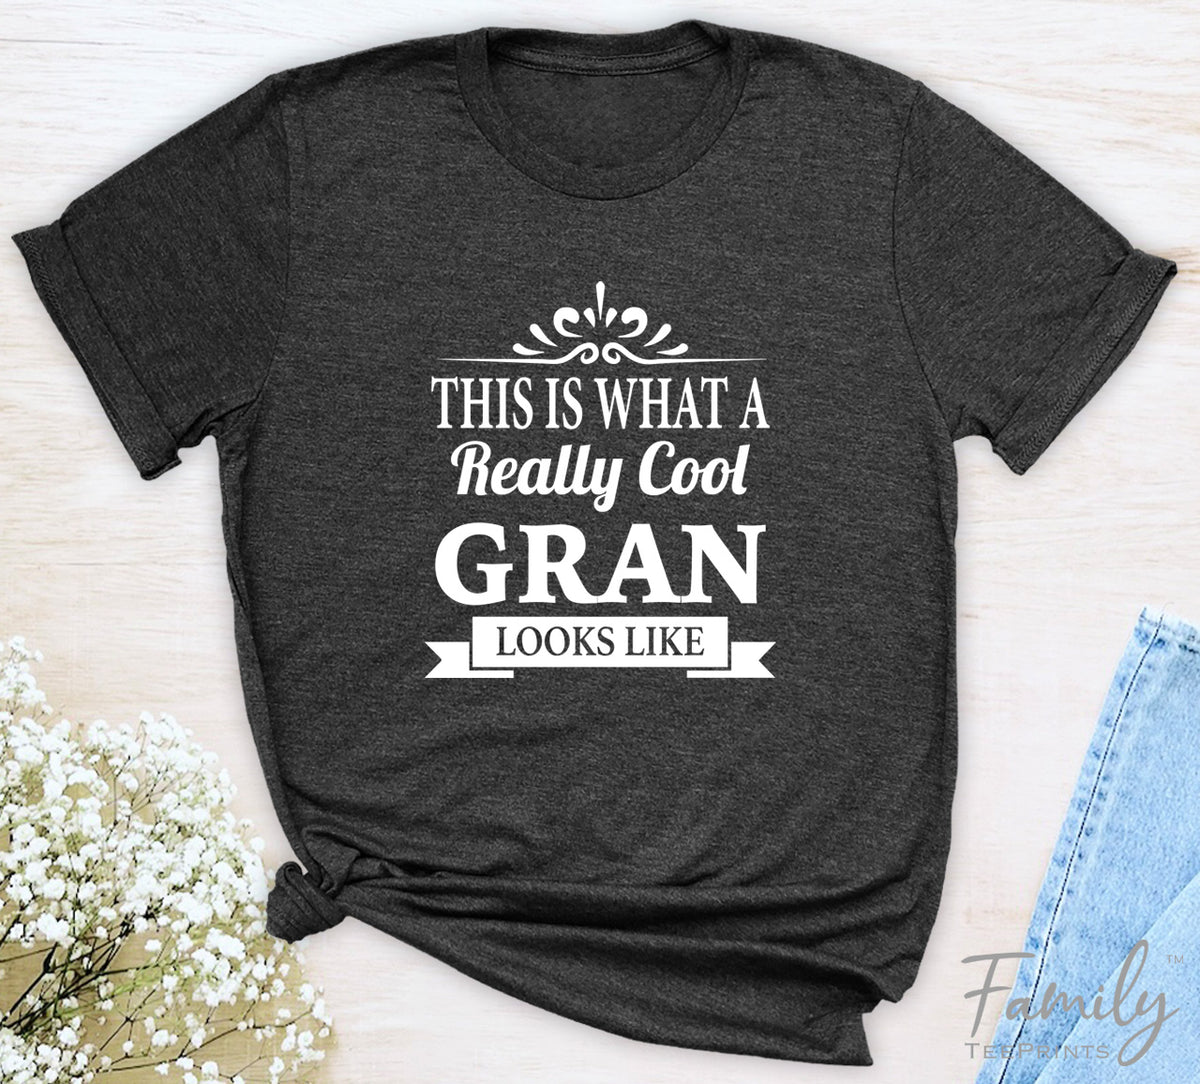 This Is What A Really Cool Gran Looks Like - Unisex T-shirt - Gran Shirt - Gift For Gran - familyteeprints